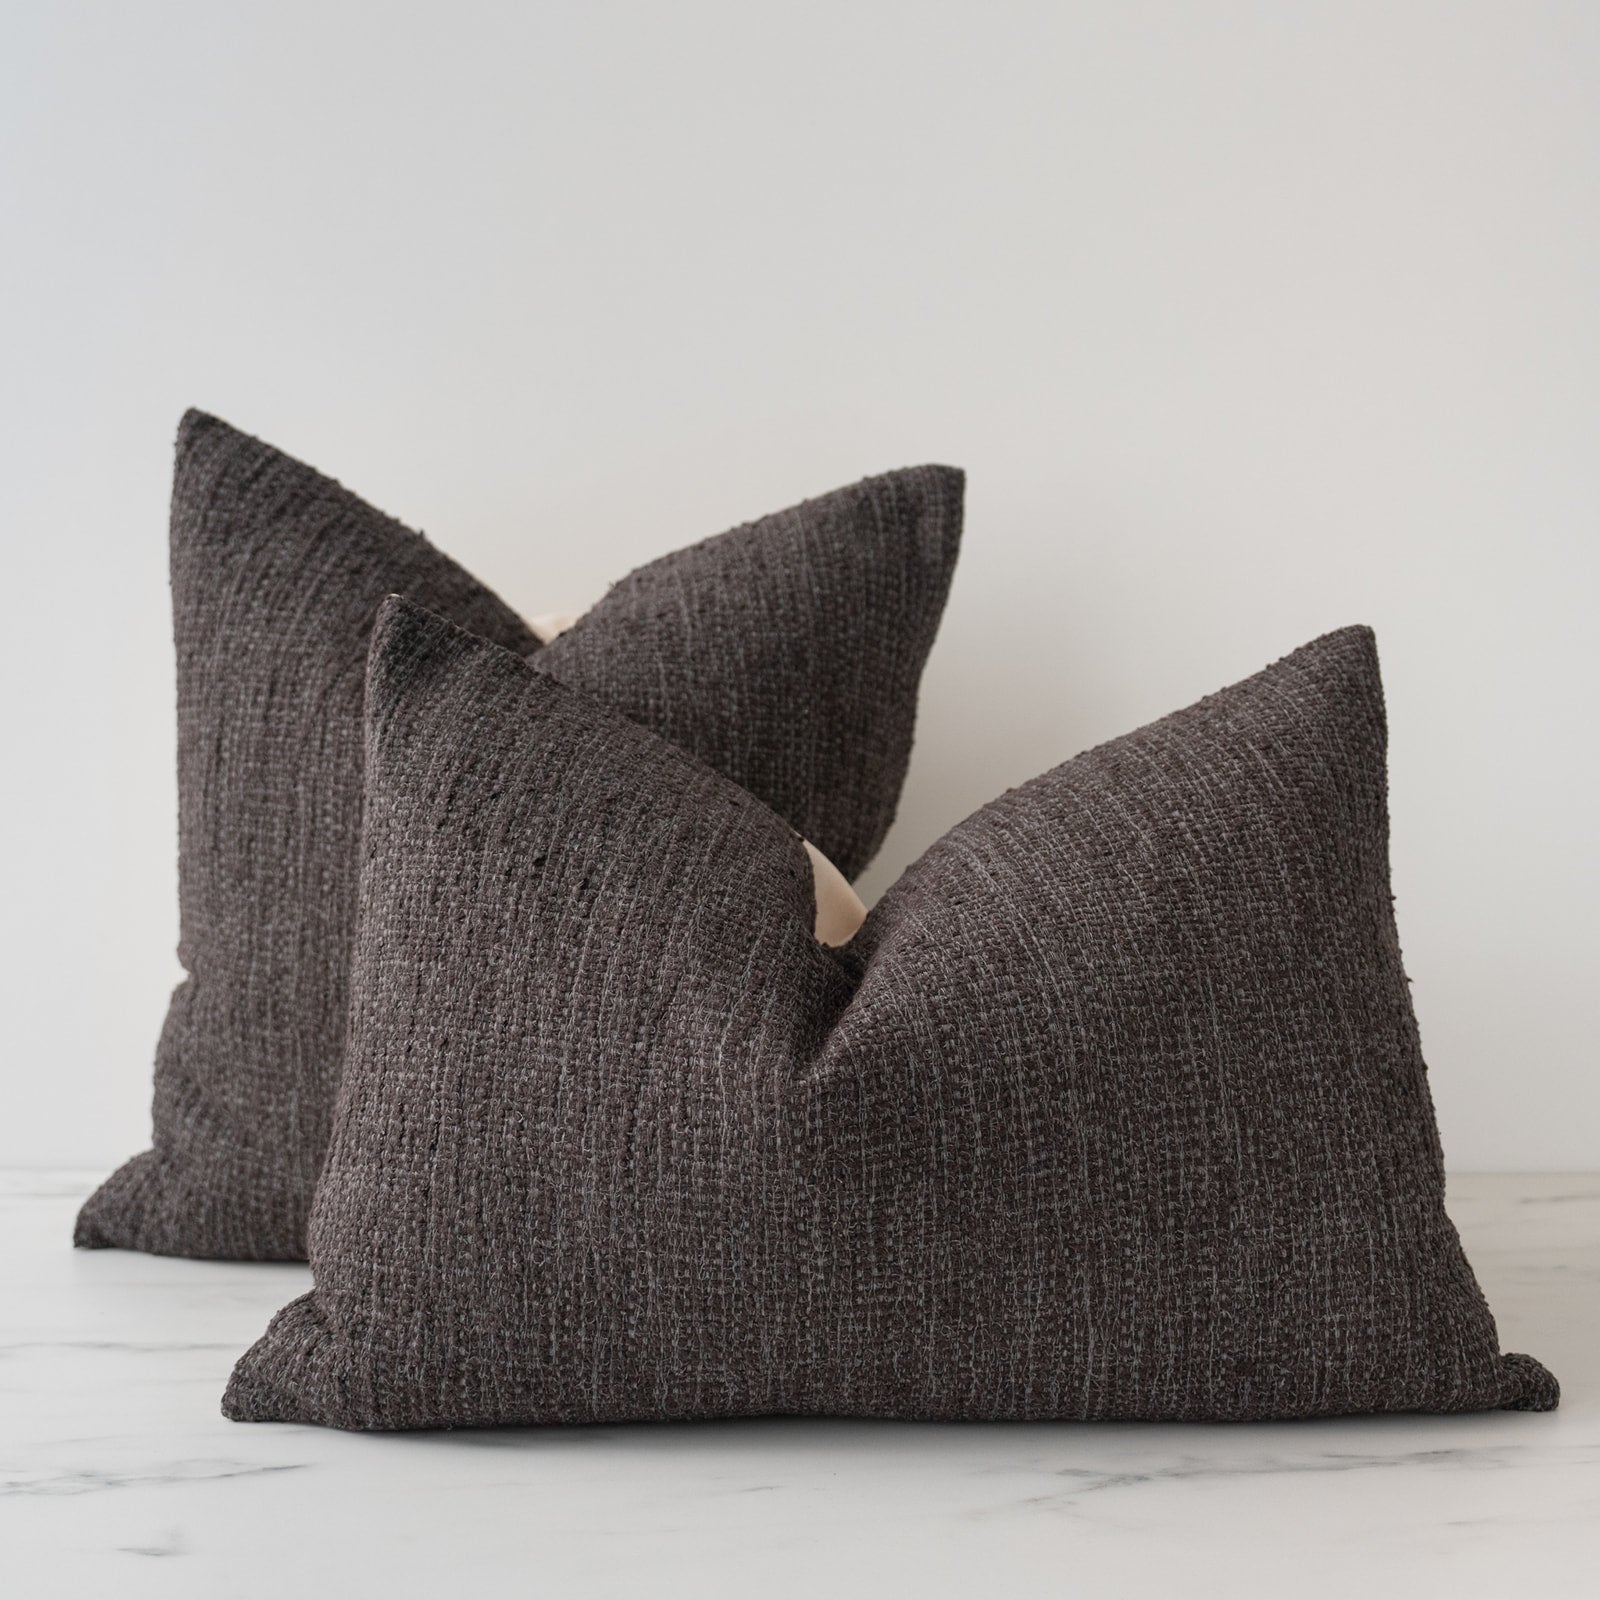 William Woven Pillow Cover - Rug & Weave